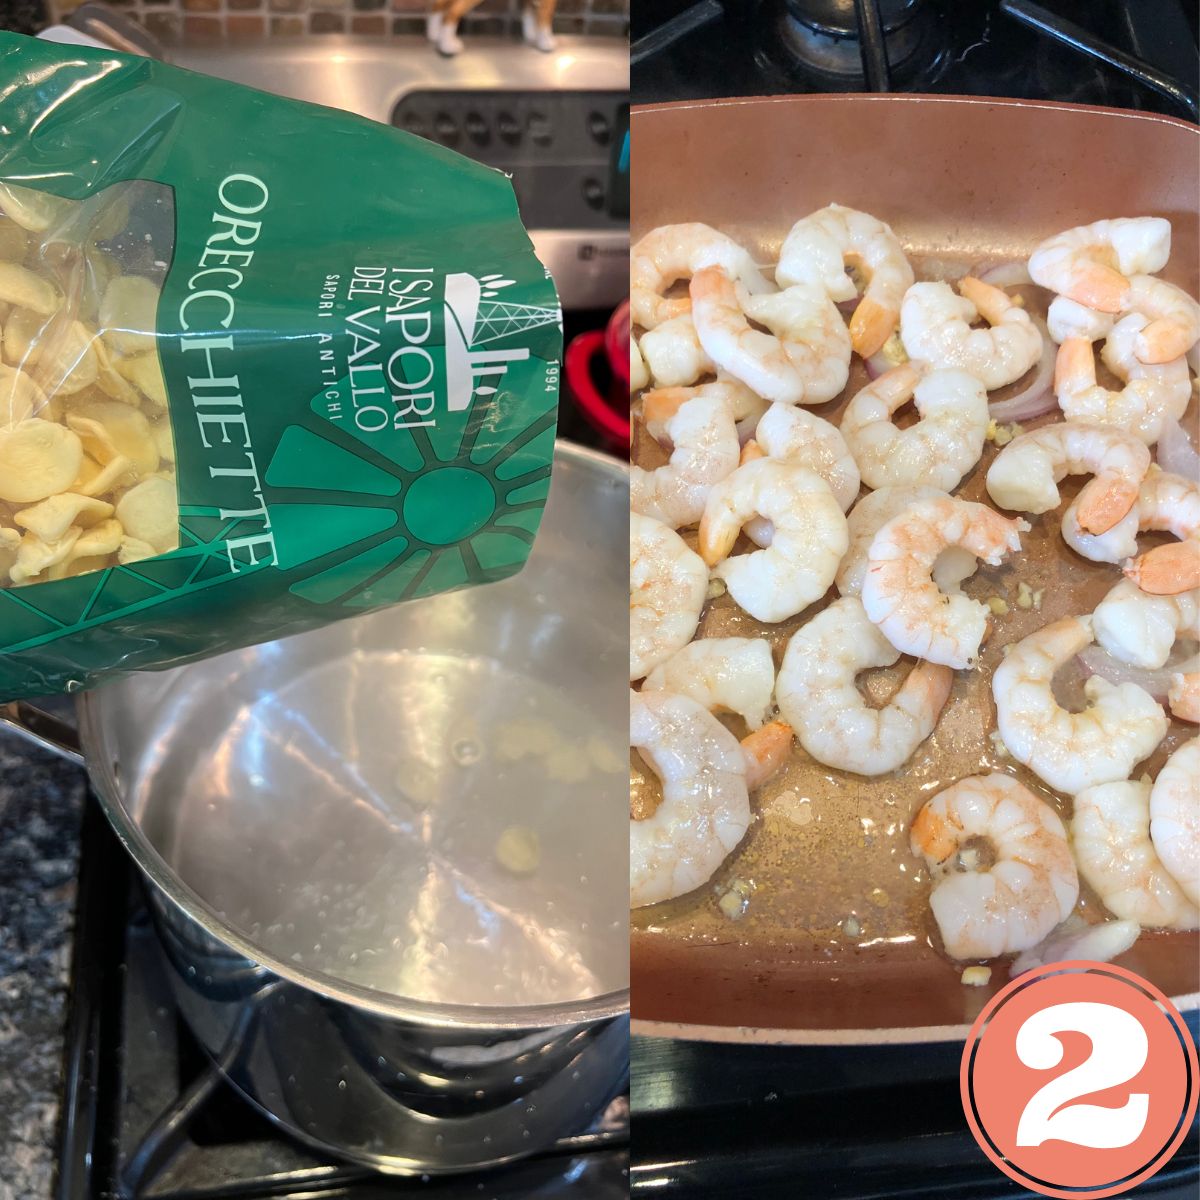 a bag of pasta being poured into boiling water and shrimp being cooked in a copper pan